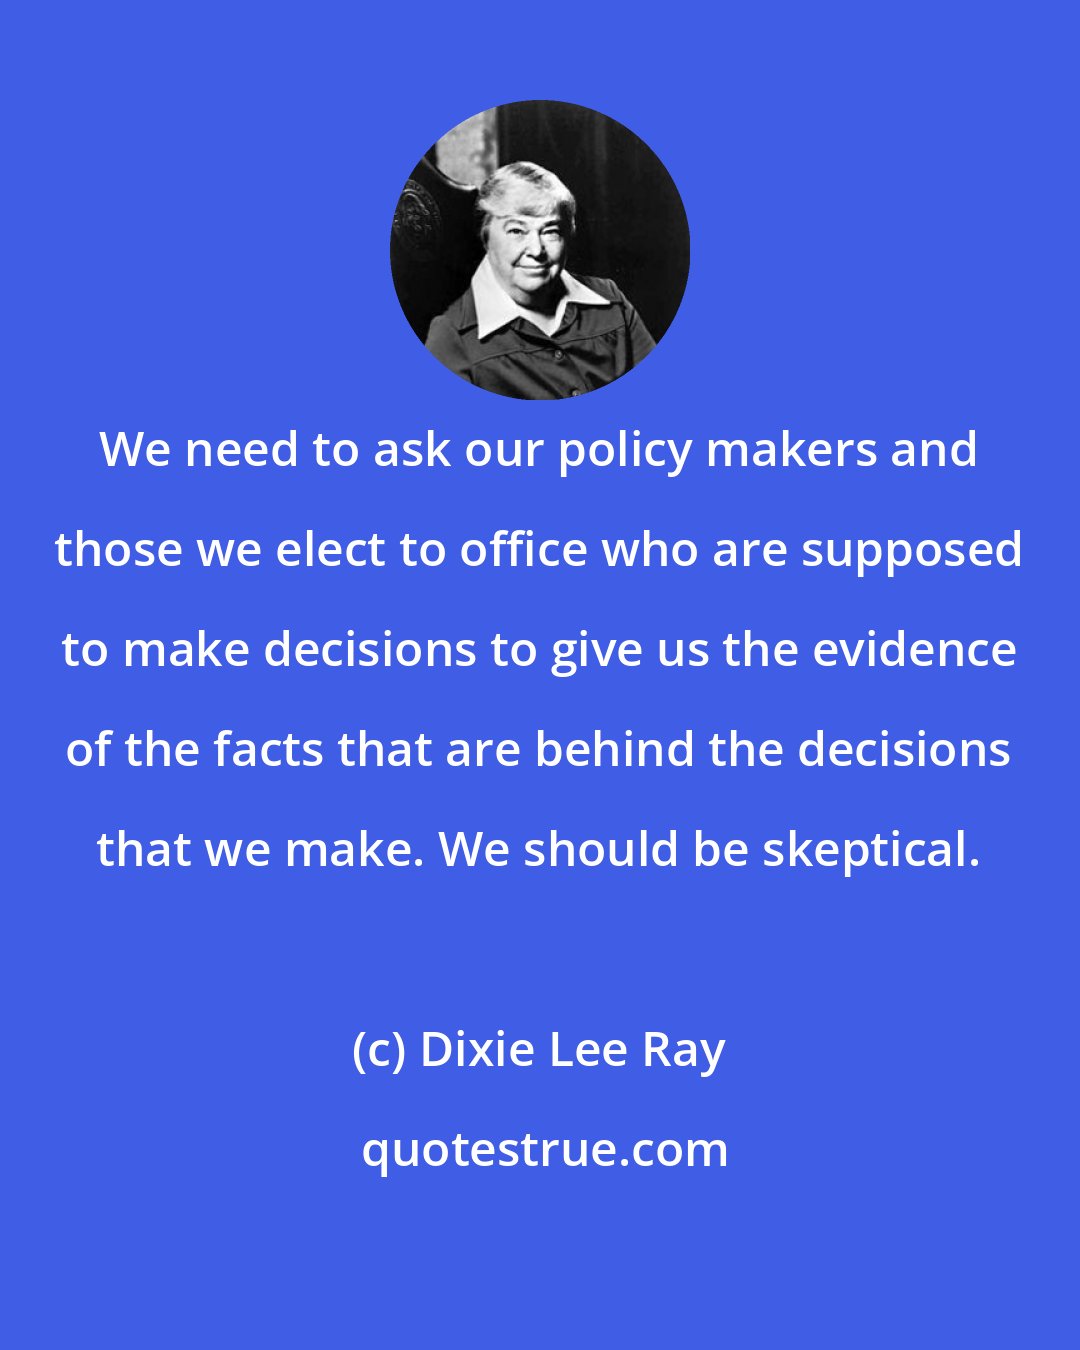 Dixie Lee Ray: We need to ask our policy makers and those we elect to office who are supposed to make decisions to give us the evidence of the facts that are behind the decisions that we make. We should be skeptical.